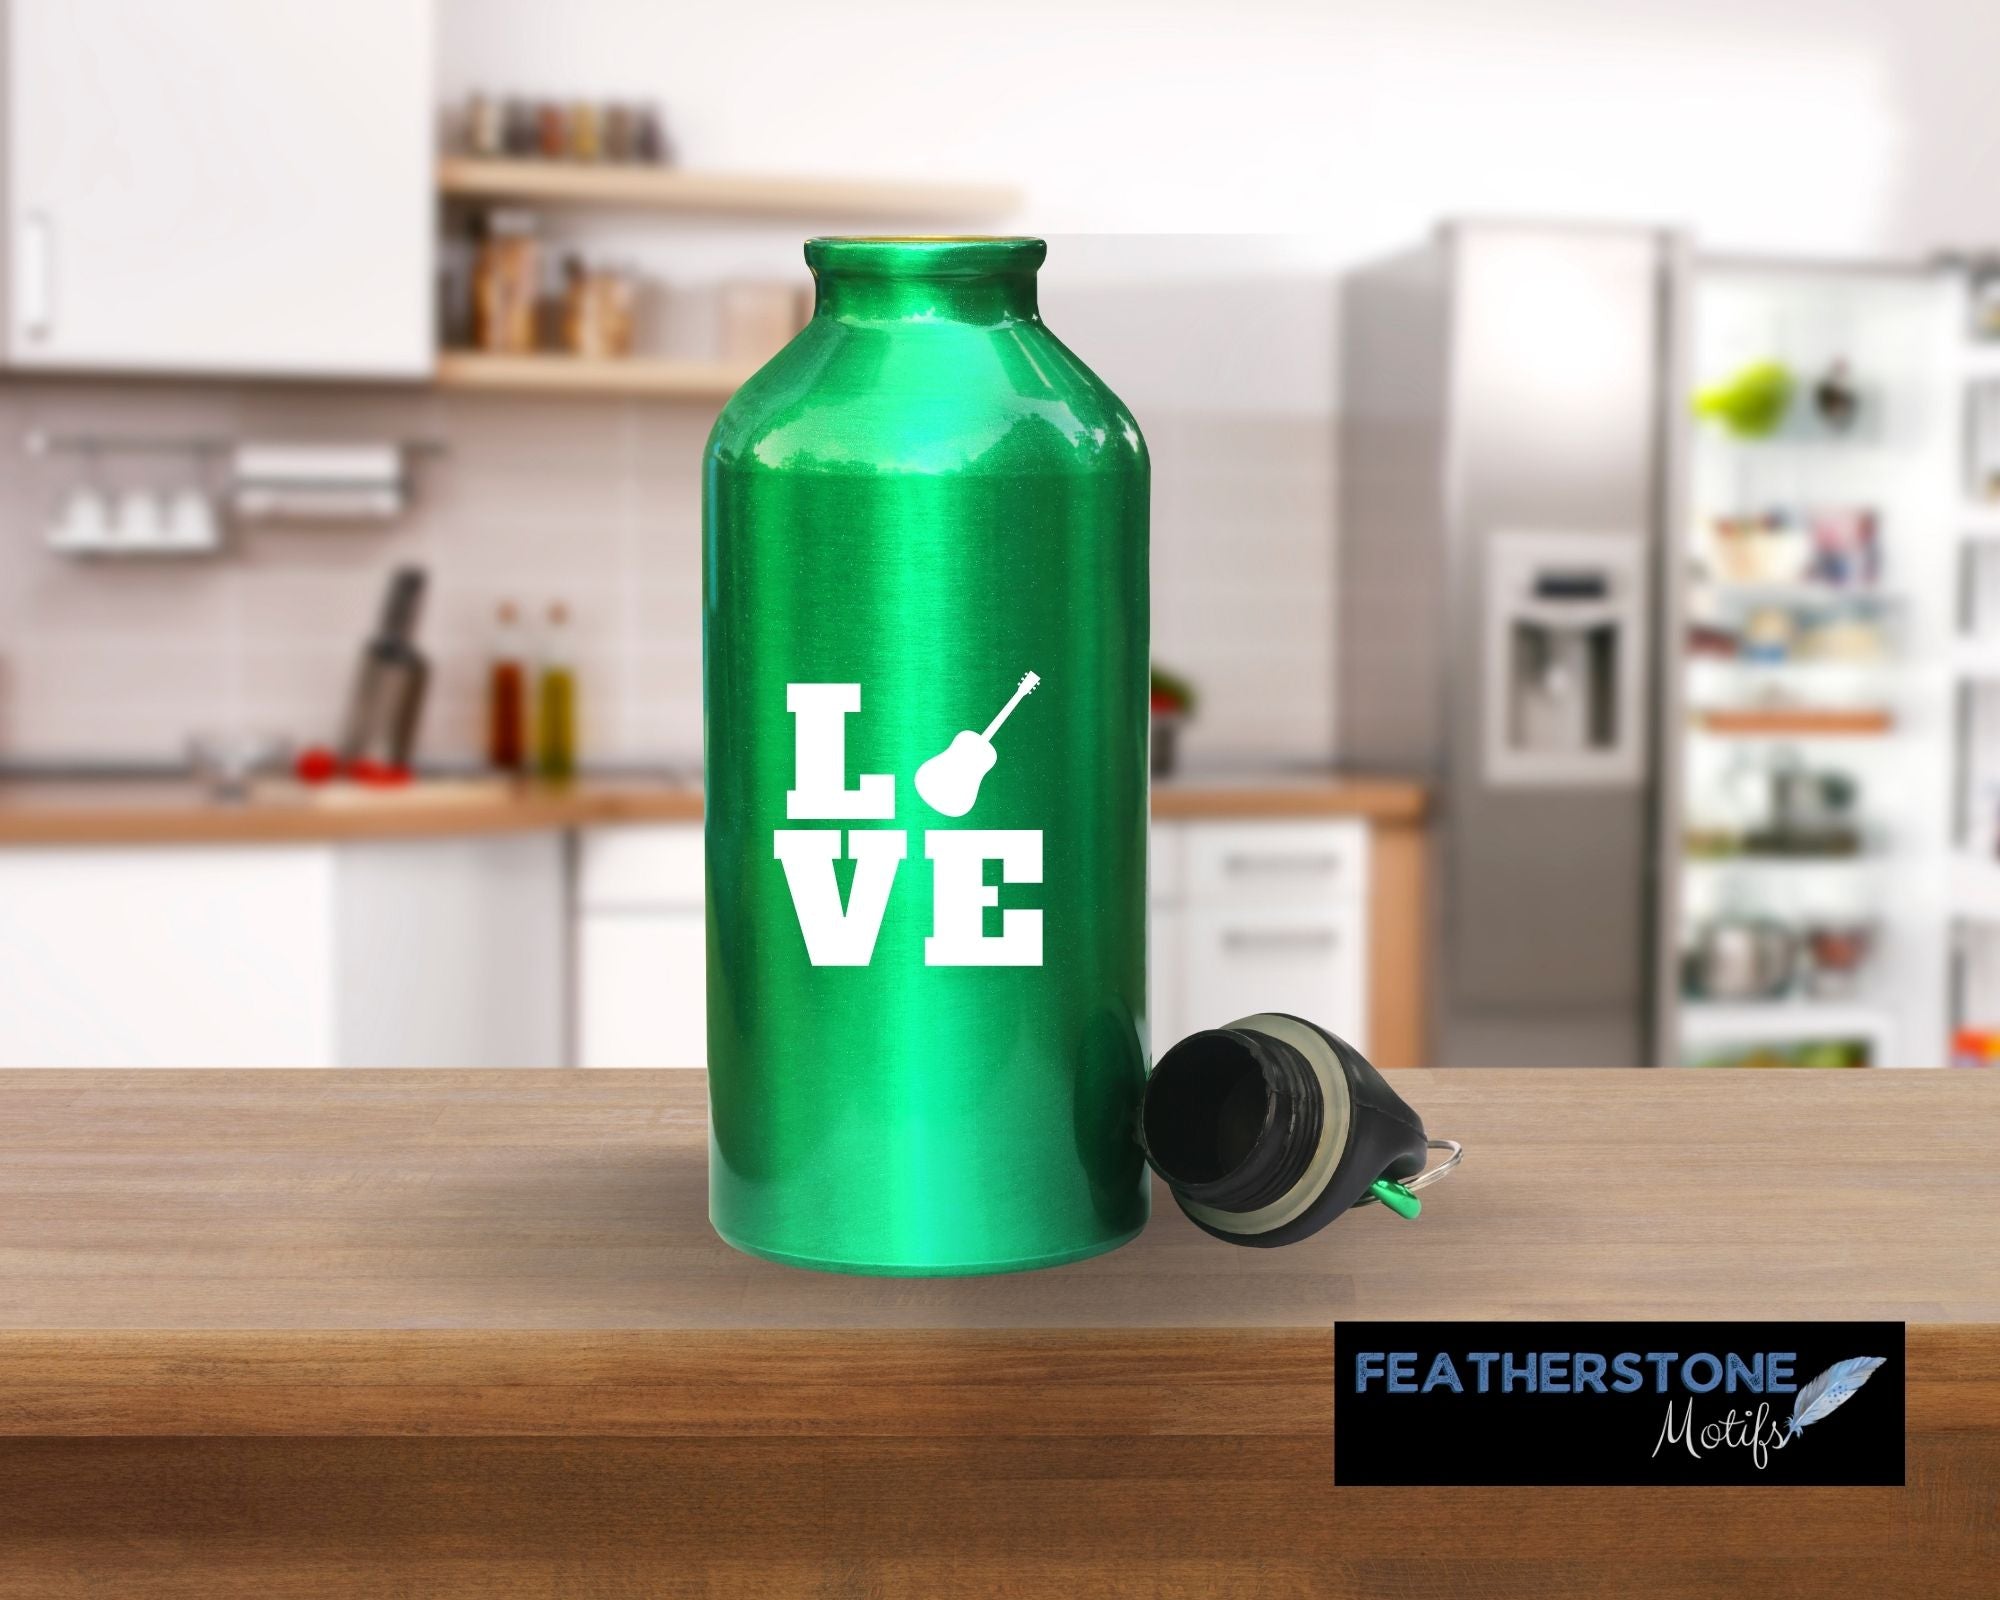 Love the guitar? Then show it with this acoustic guitar love square! Available in 4 sizes and 10 colors, these vinyl decals make great gifts for everyone. This image shows the acoustic guitar love square on a water bottle.